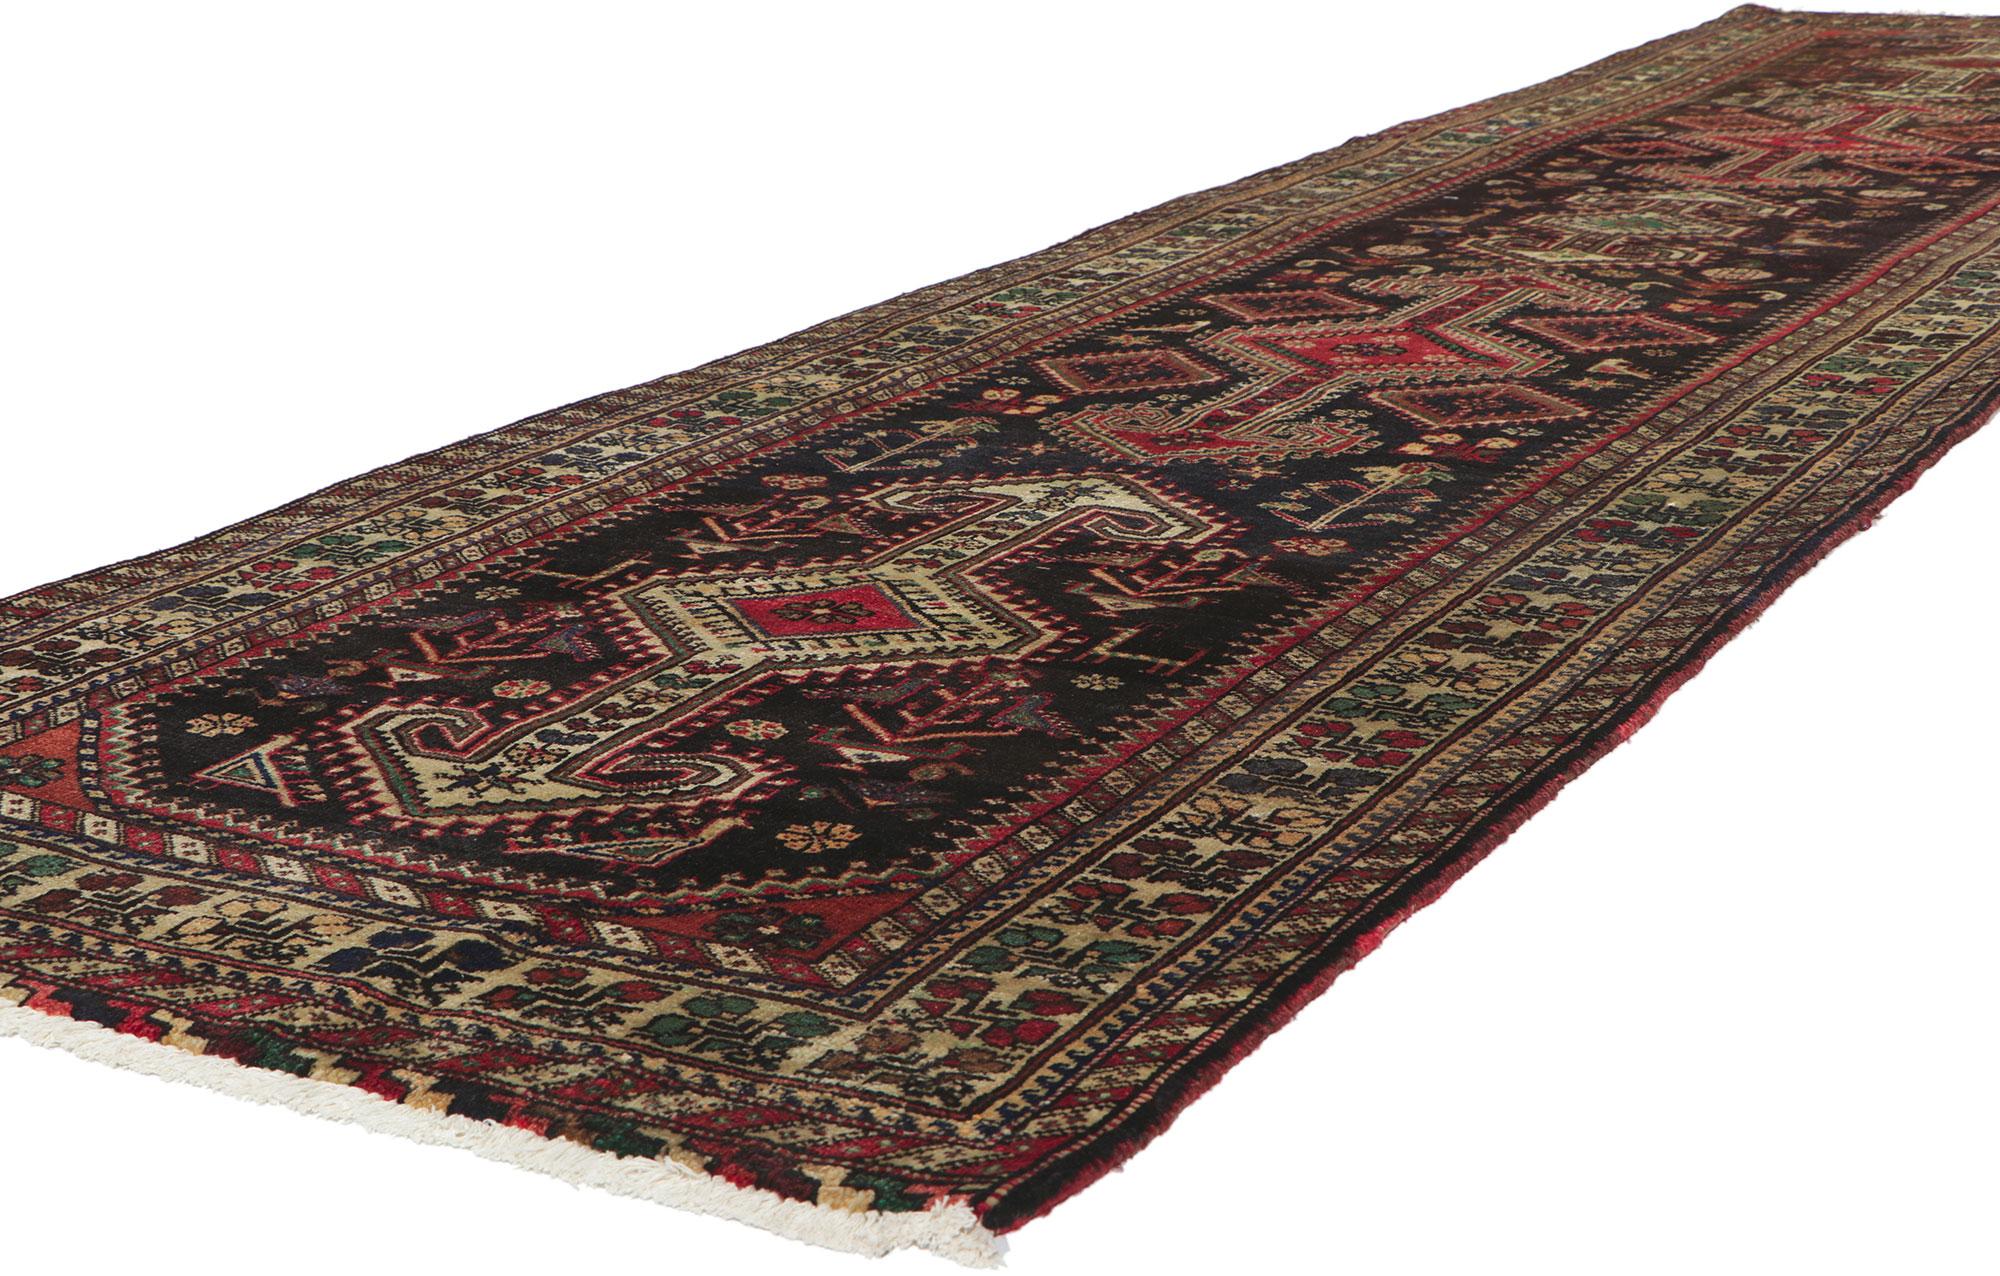 61048 vintage Persian Northwest rug Runner with Tribal style, 03'07 x 13'10. Full of tiny details and a bold expressive design combined with tribal style, this hand-knotted wool vintage Persian Northwest runner is a captivating vision of woven